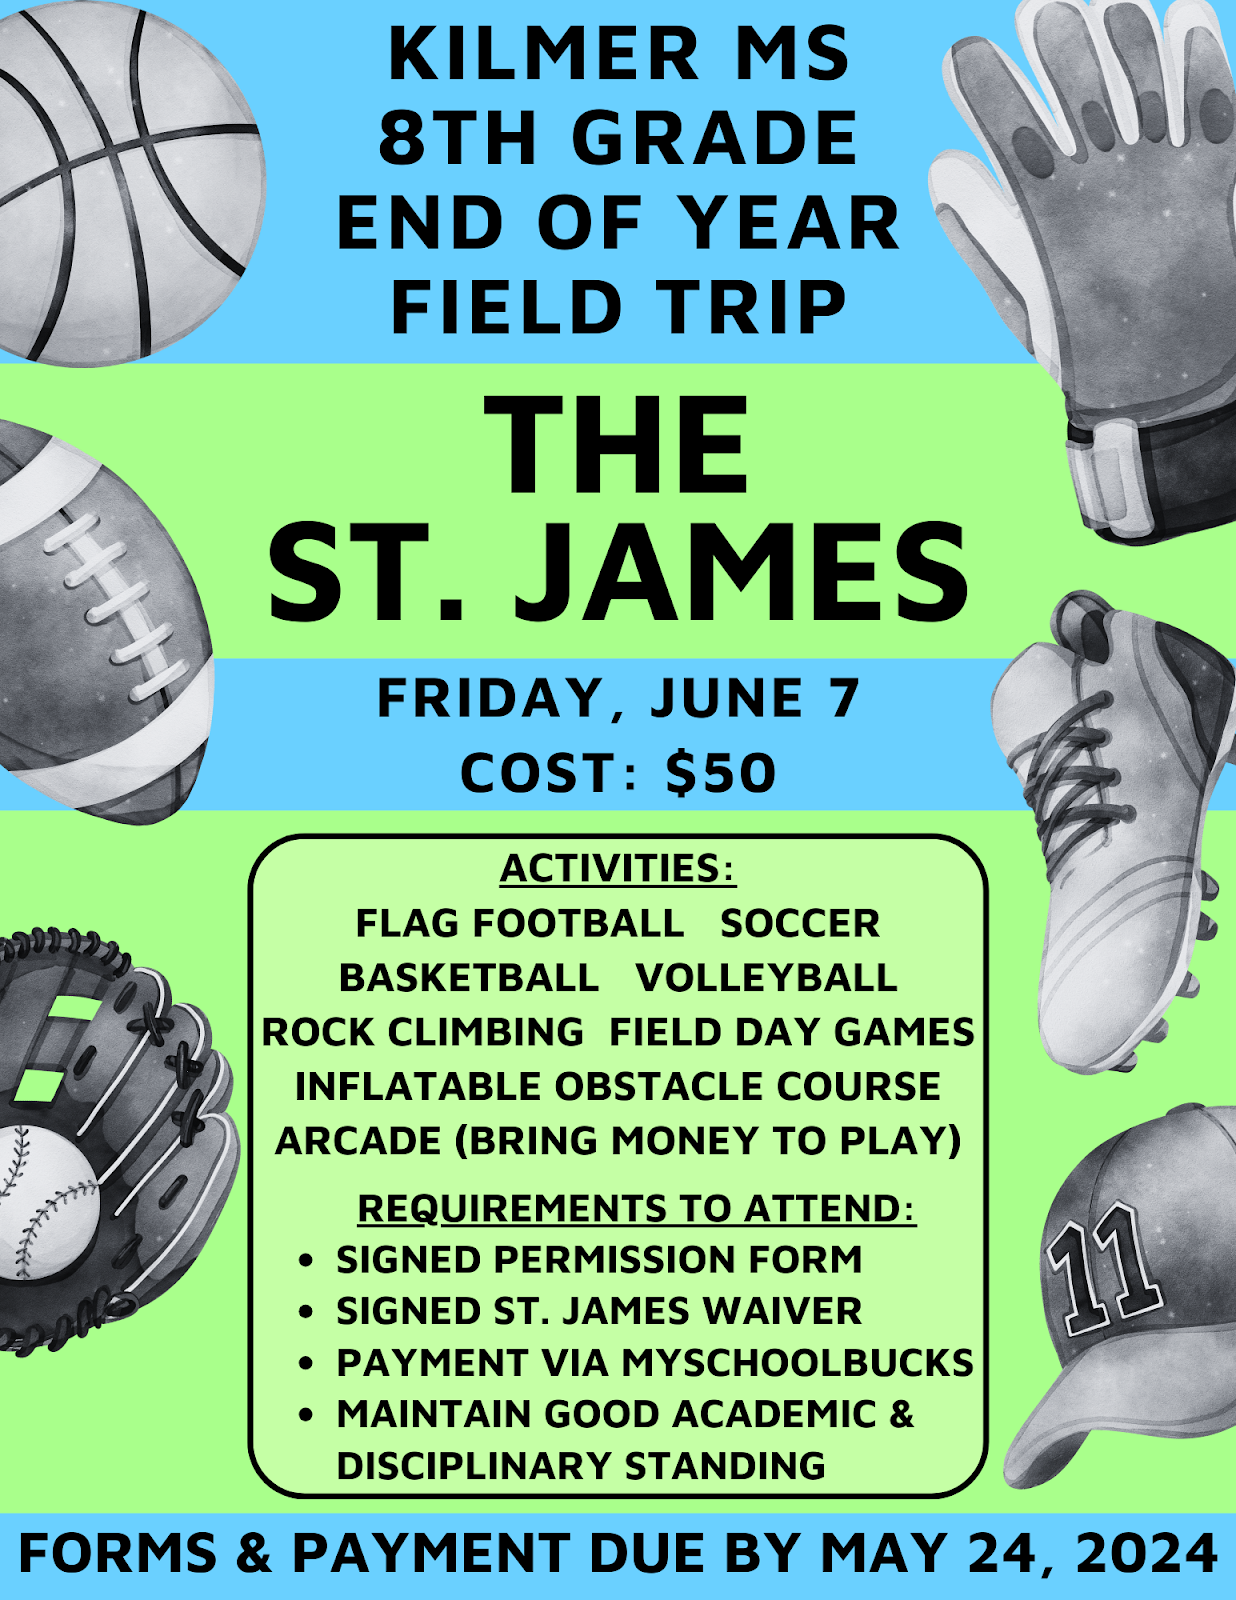 Kilmer MS 8th Grade End of Year Field Trip flyer. The St. James. Friday June 7th. Cost is 50 dollars. Activities include flag football, soccer, basketball, volleyball, rock climbing, field day games, inflatable obstacle course, arcade (bring money to play). Requirements to attend include a signed permission form, signed St. James waiver, payment via myschoolbucks, maintain good academic and disciplinary standing.